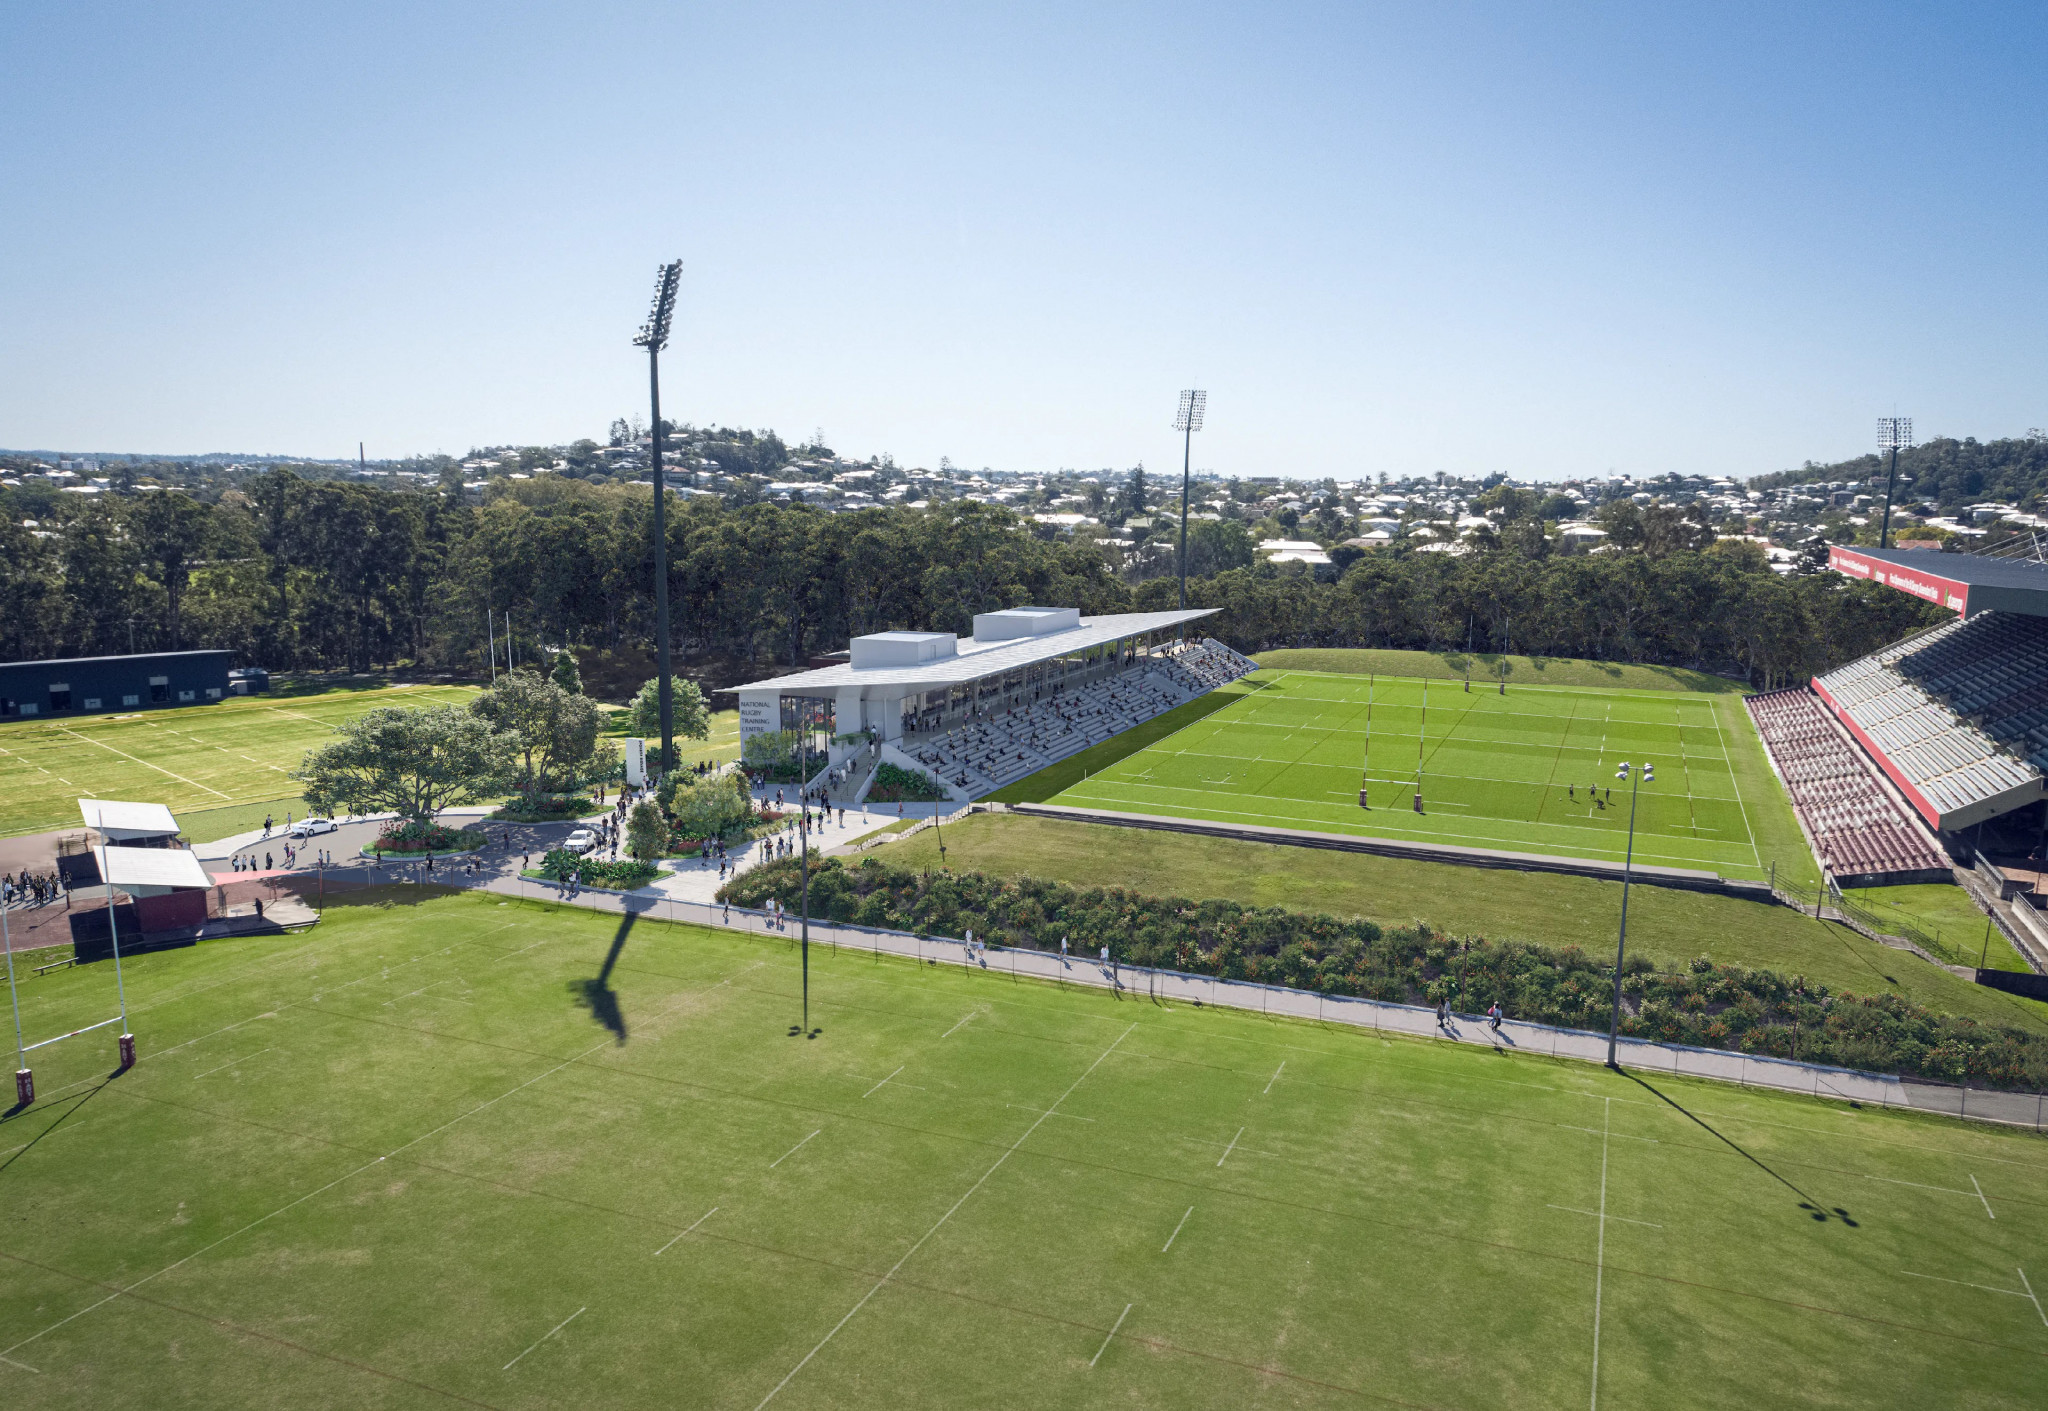 Cost to make Brisbane 2032 hockey venue ready to increase after capacity capped 